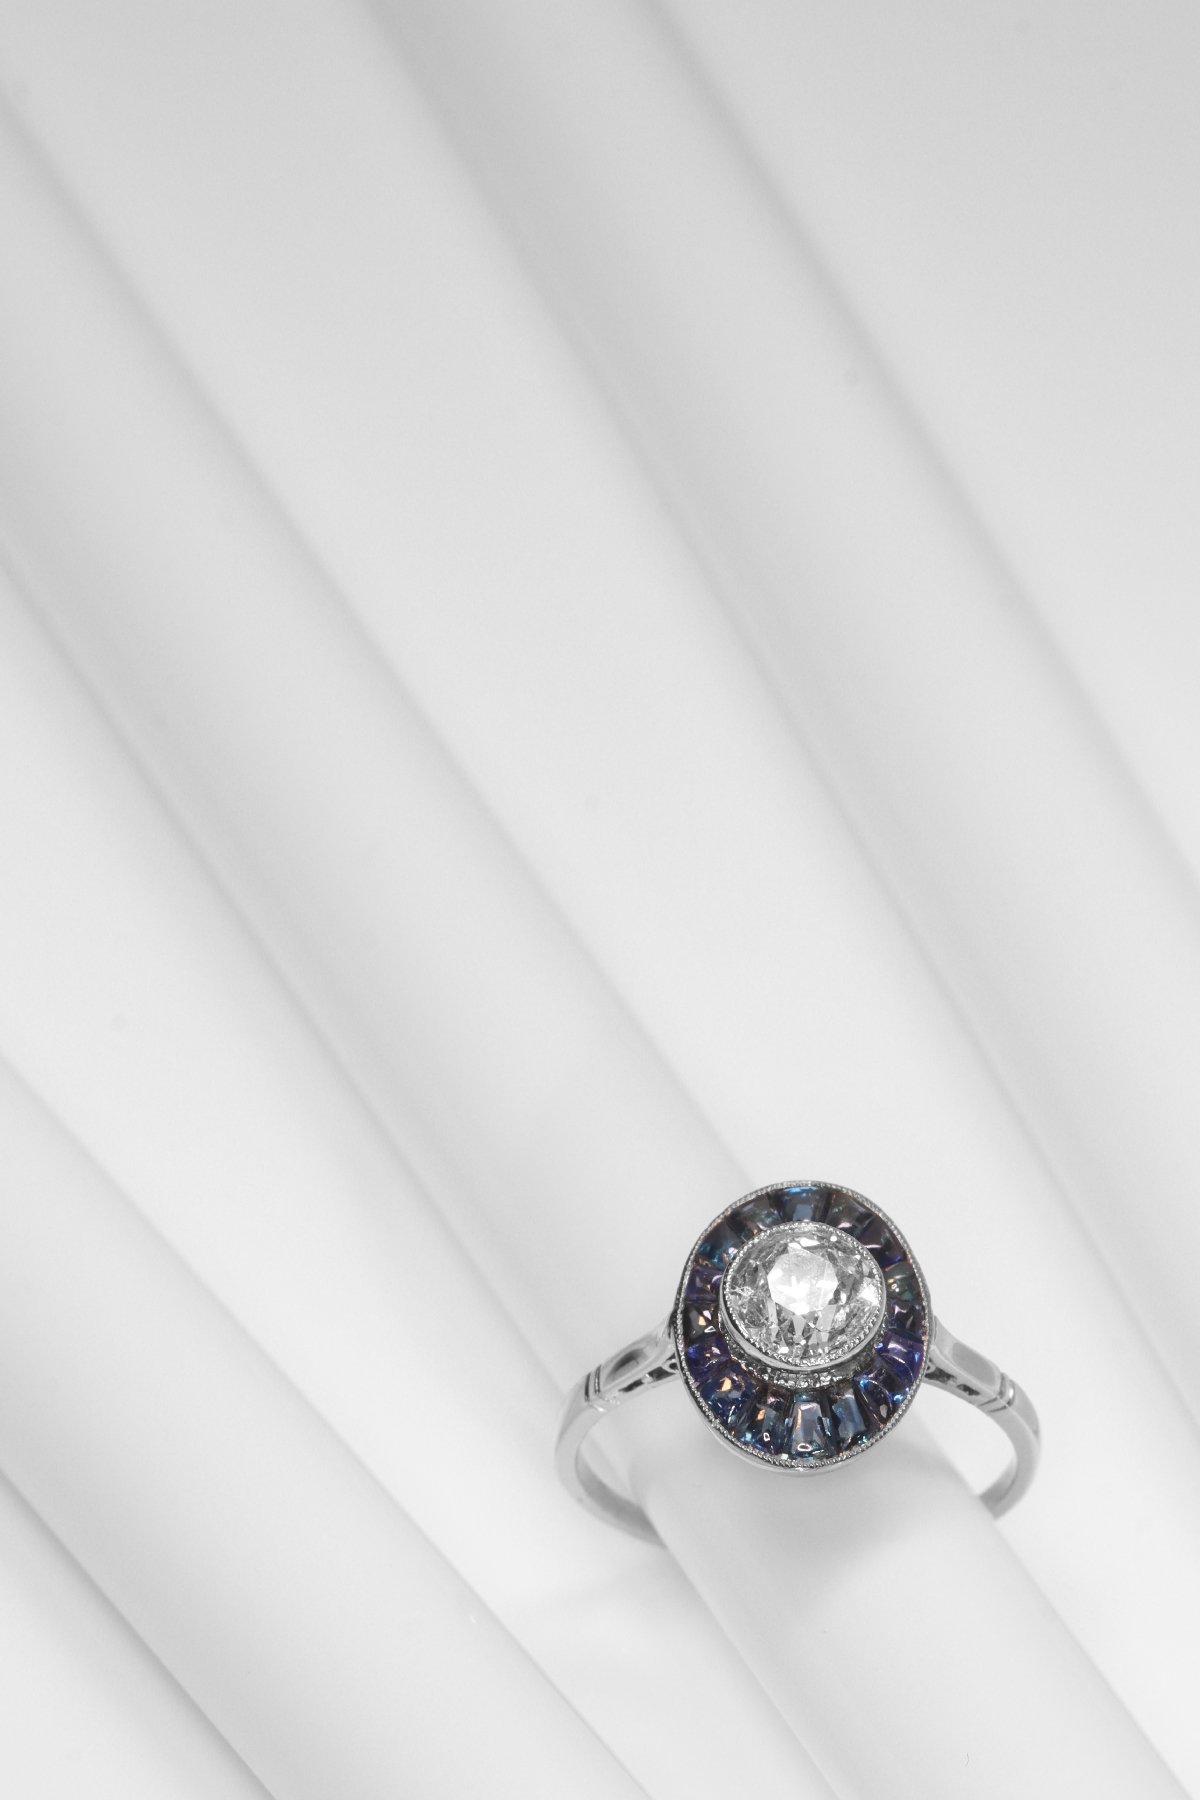 Click the picture to get to see this Vintage Art Deco platinum diamond sapphire engagement ring.